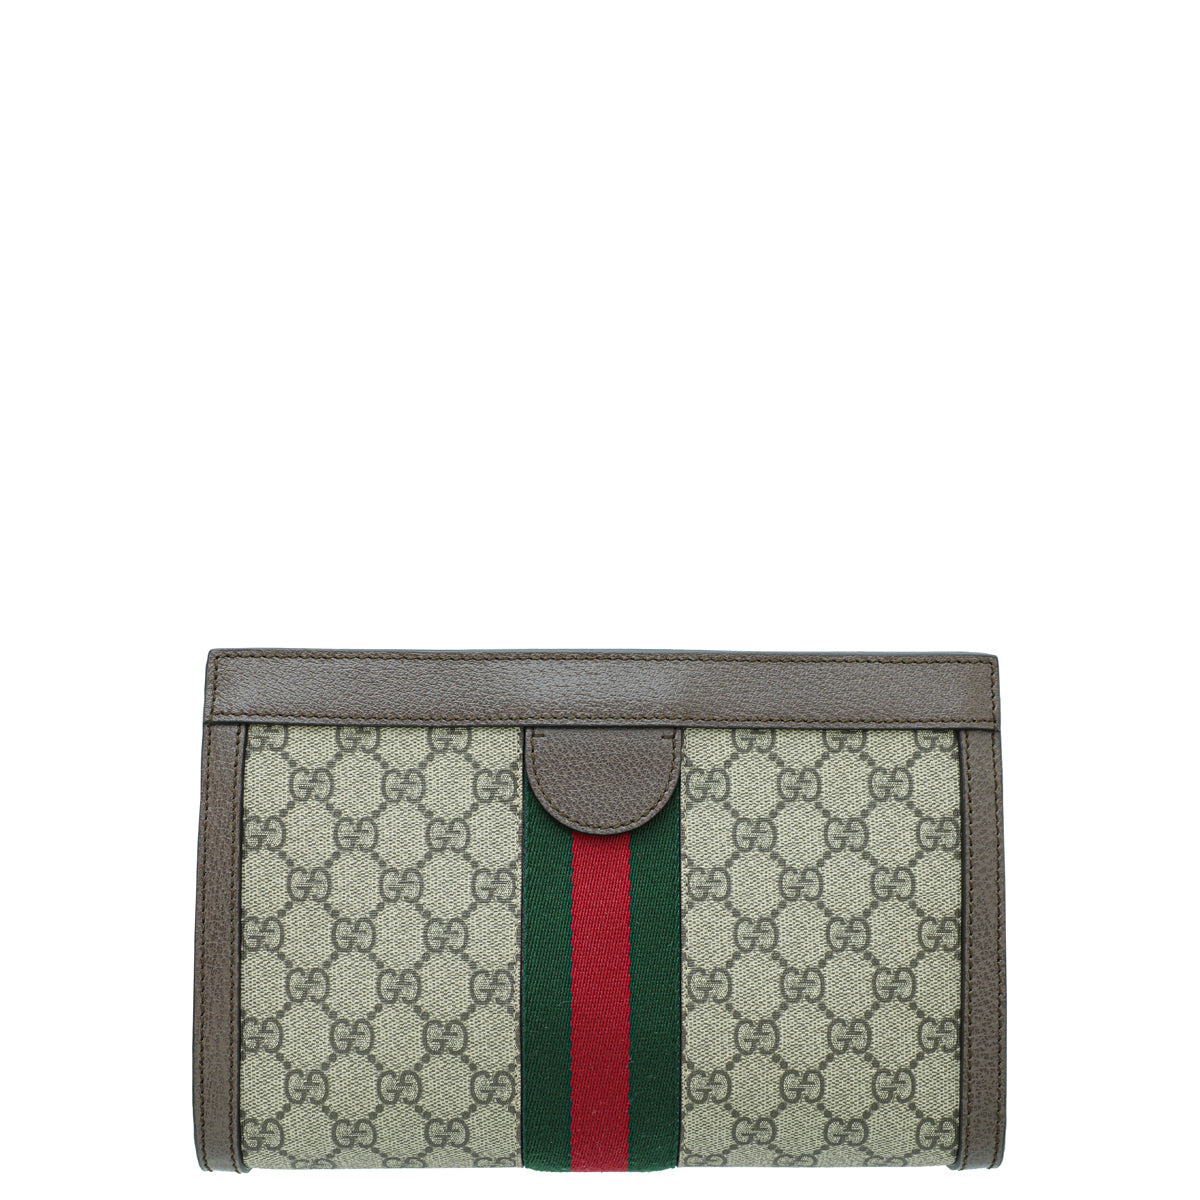 Gucci Bicolor GG Ophidia Small Shoulder Bag